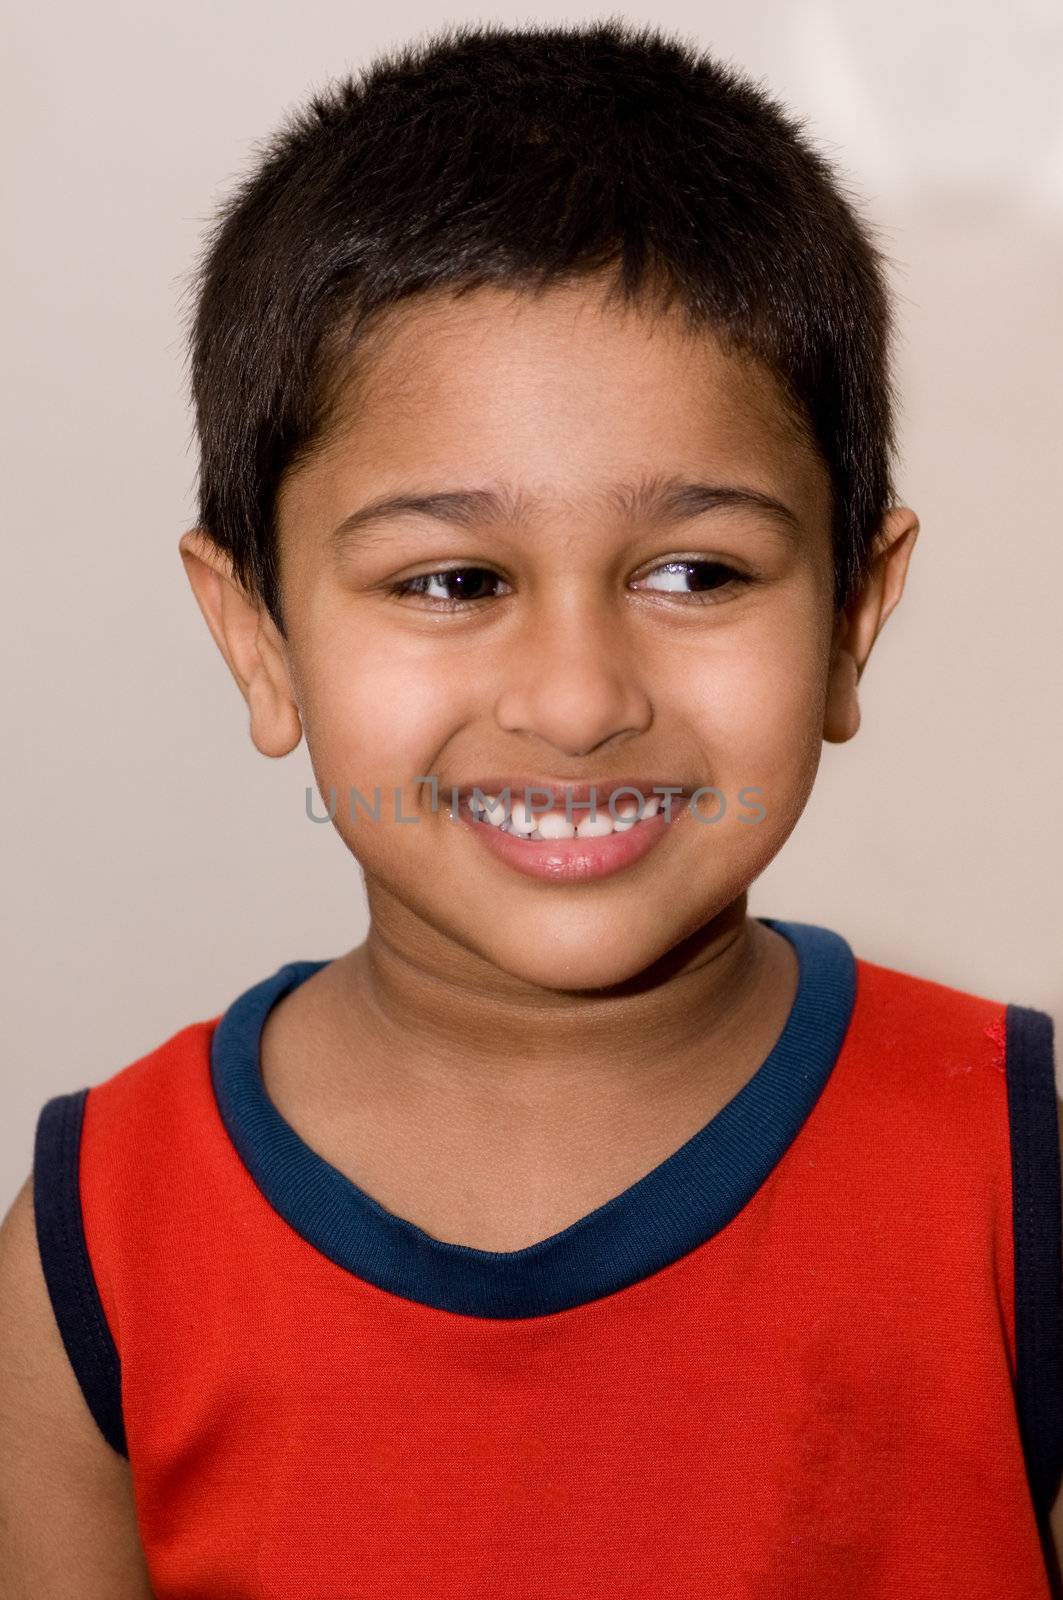 An handsome Indian kid smiling by pazham